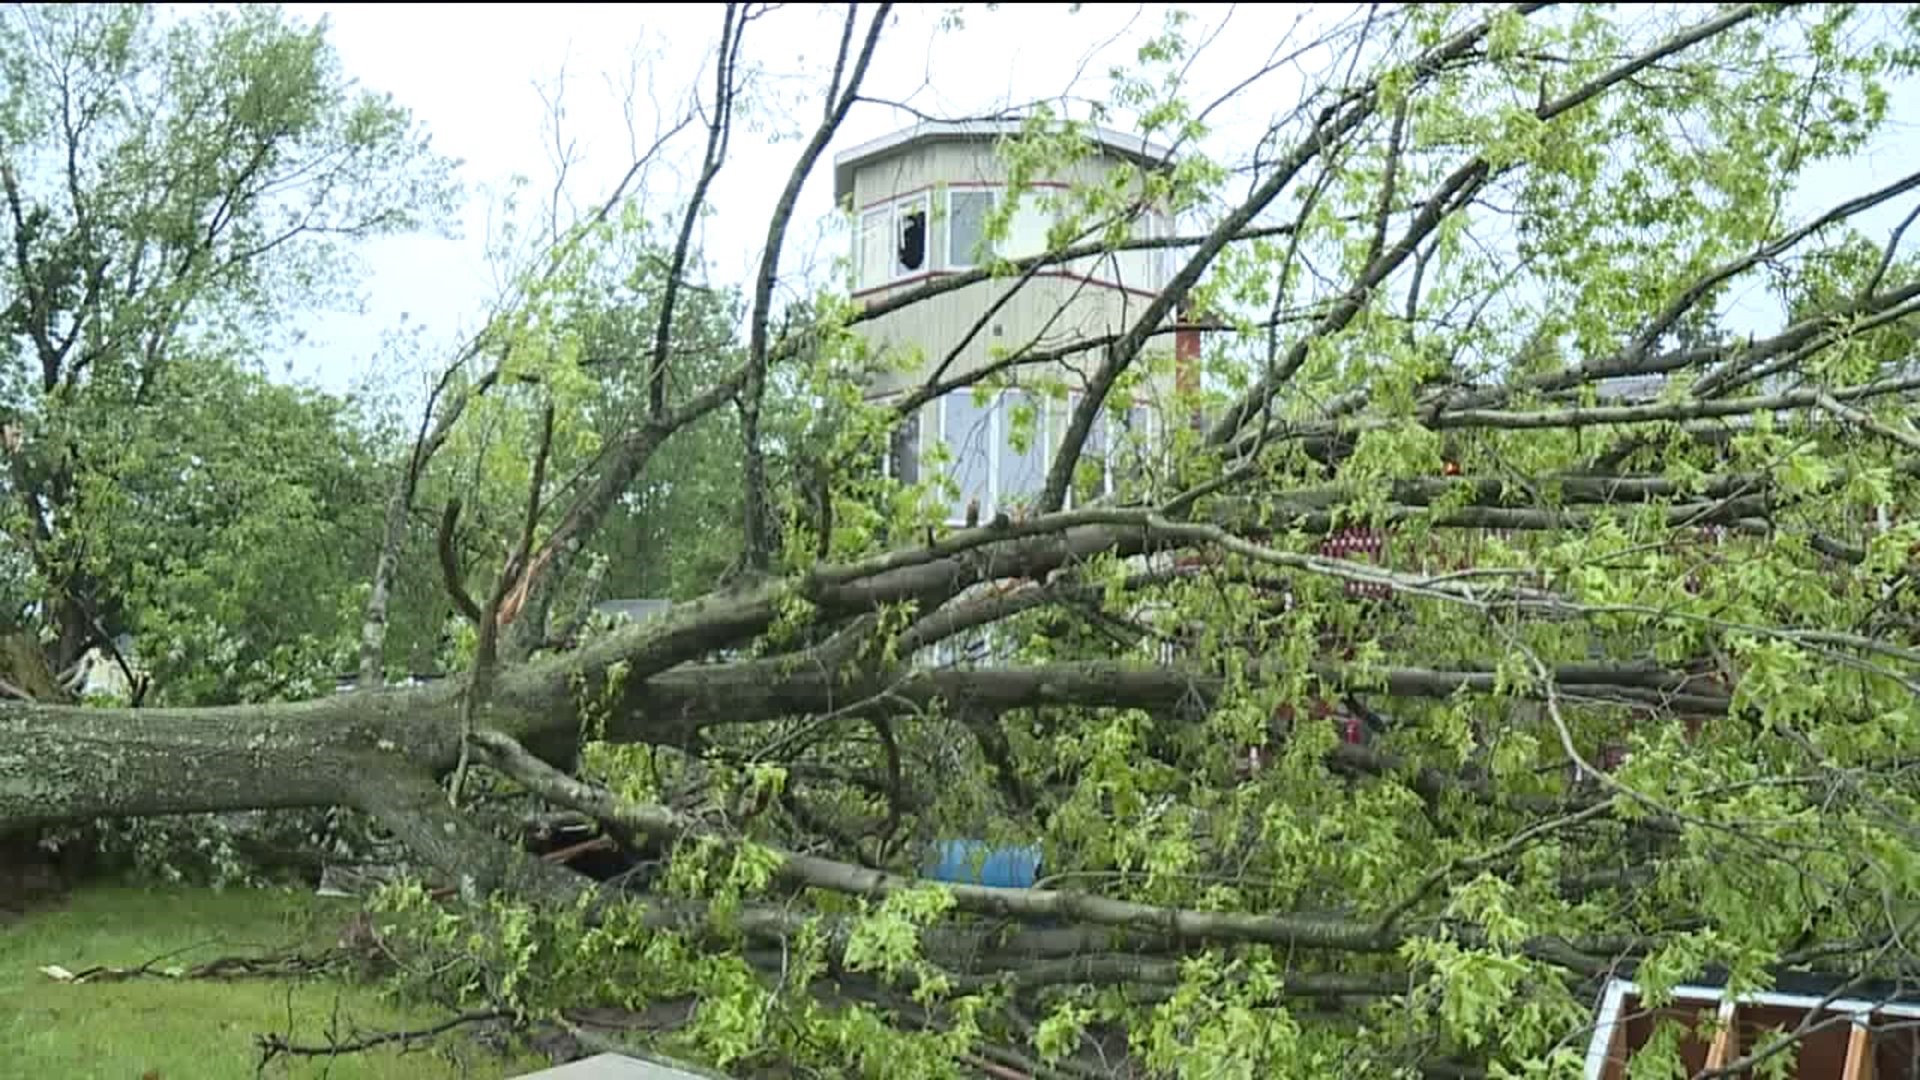 After Storm, Assessing Damage and Cleaning Up In Newton Township